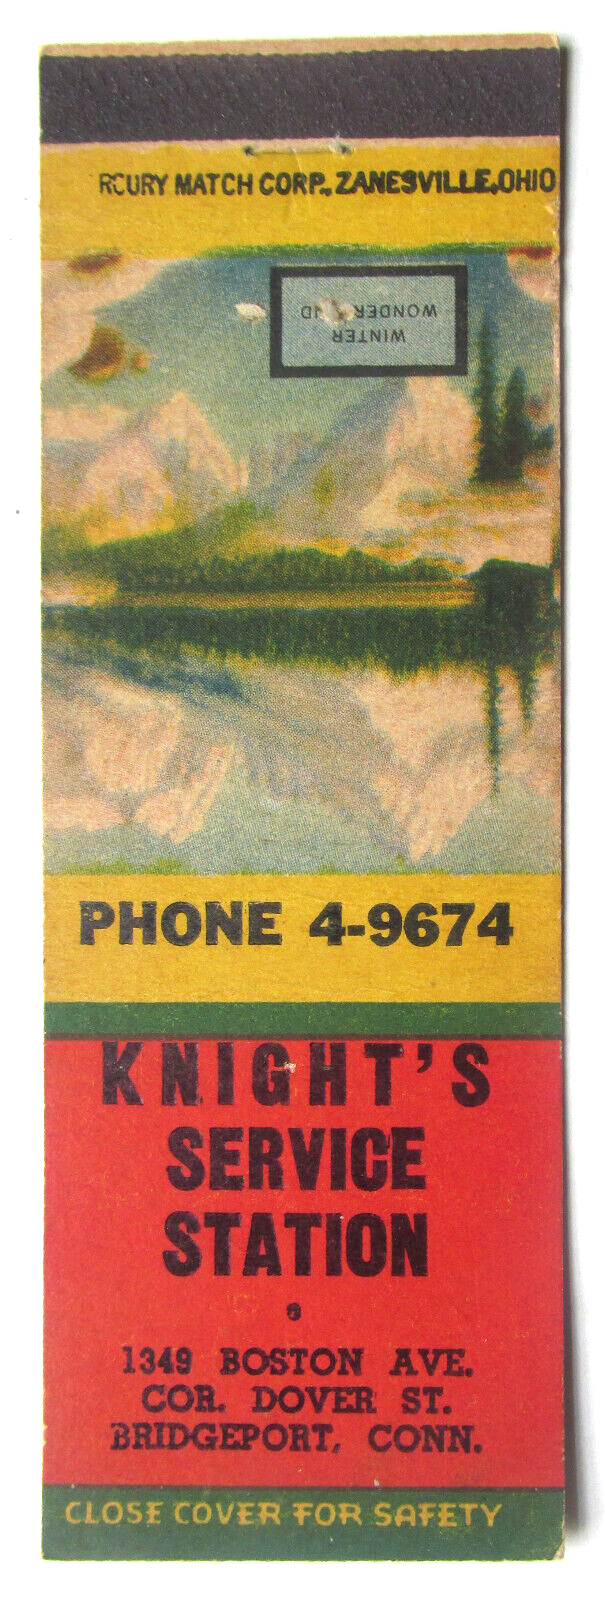 Primary image for Knight's Service Station - Bridgeport, Connecticut Matchbook Cover Winter Wonder